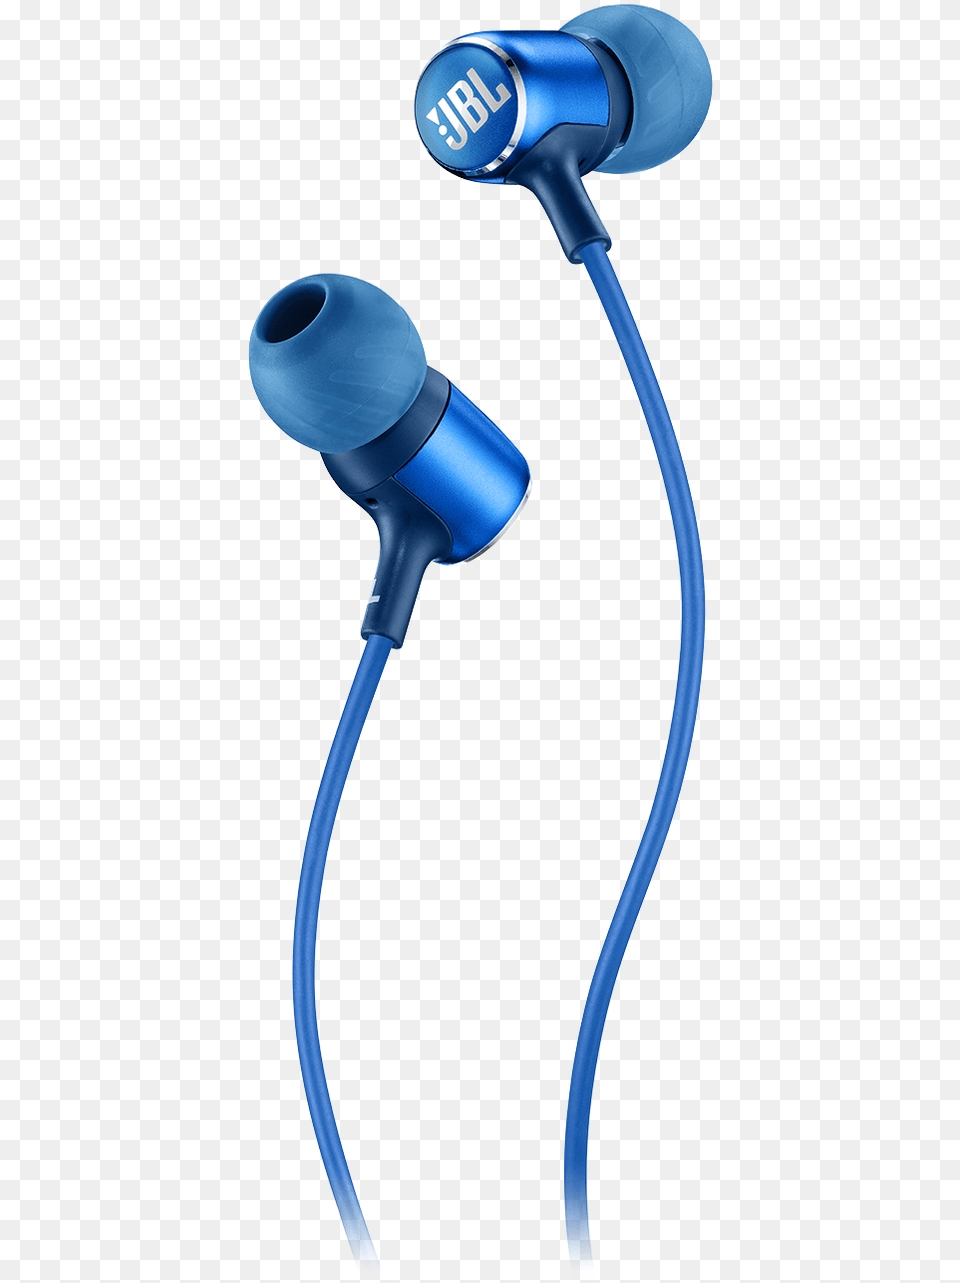 Jbl Live 100 Blue, Electrical Device, Microphone, Electronics, Headphones Png Image